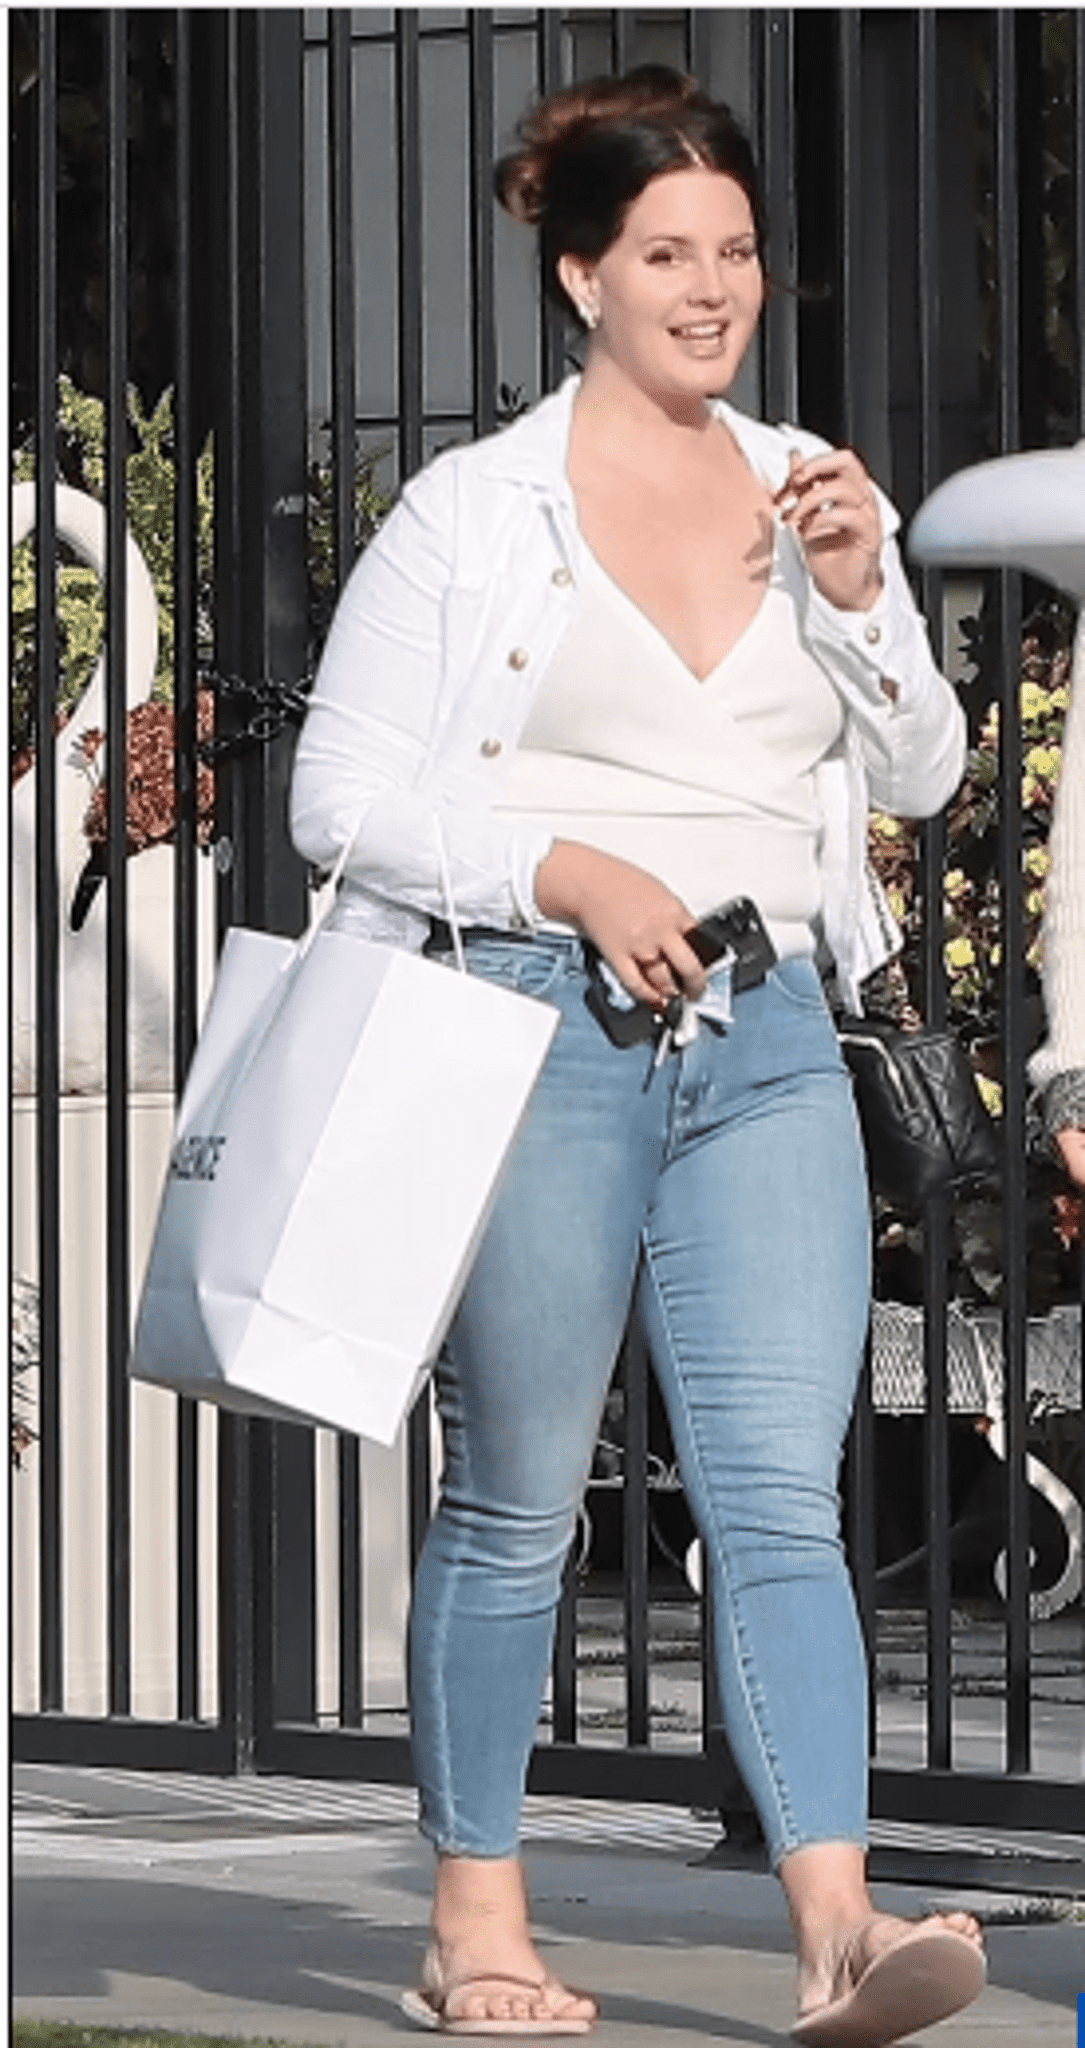 Strongly recovered Lana Del Rey walks around Hollywood in tight jeans